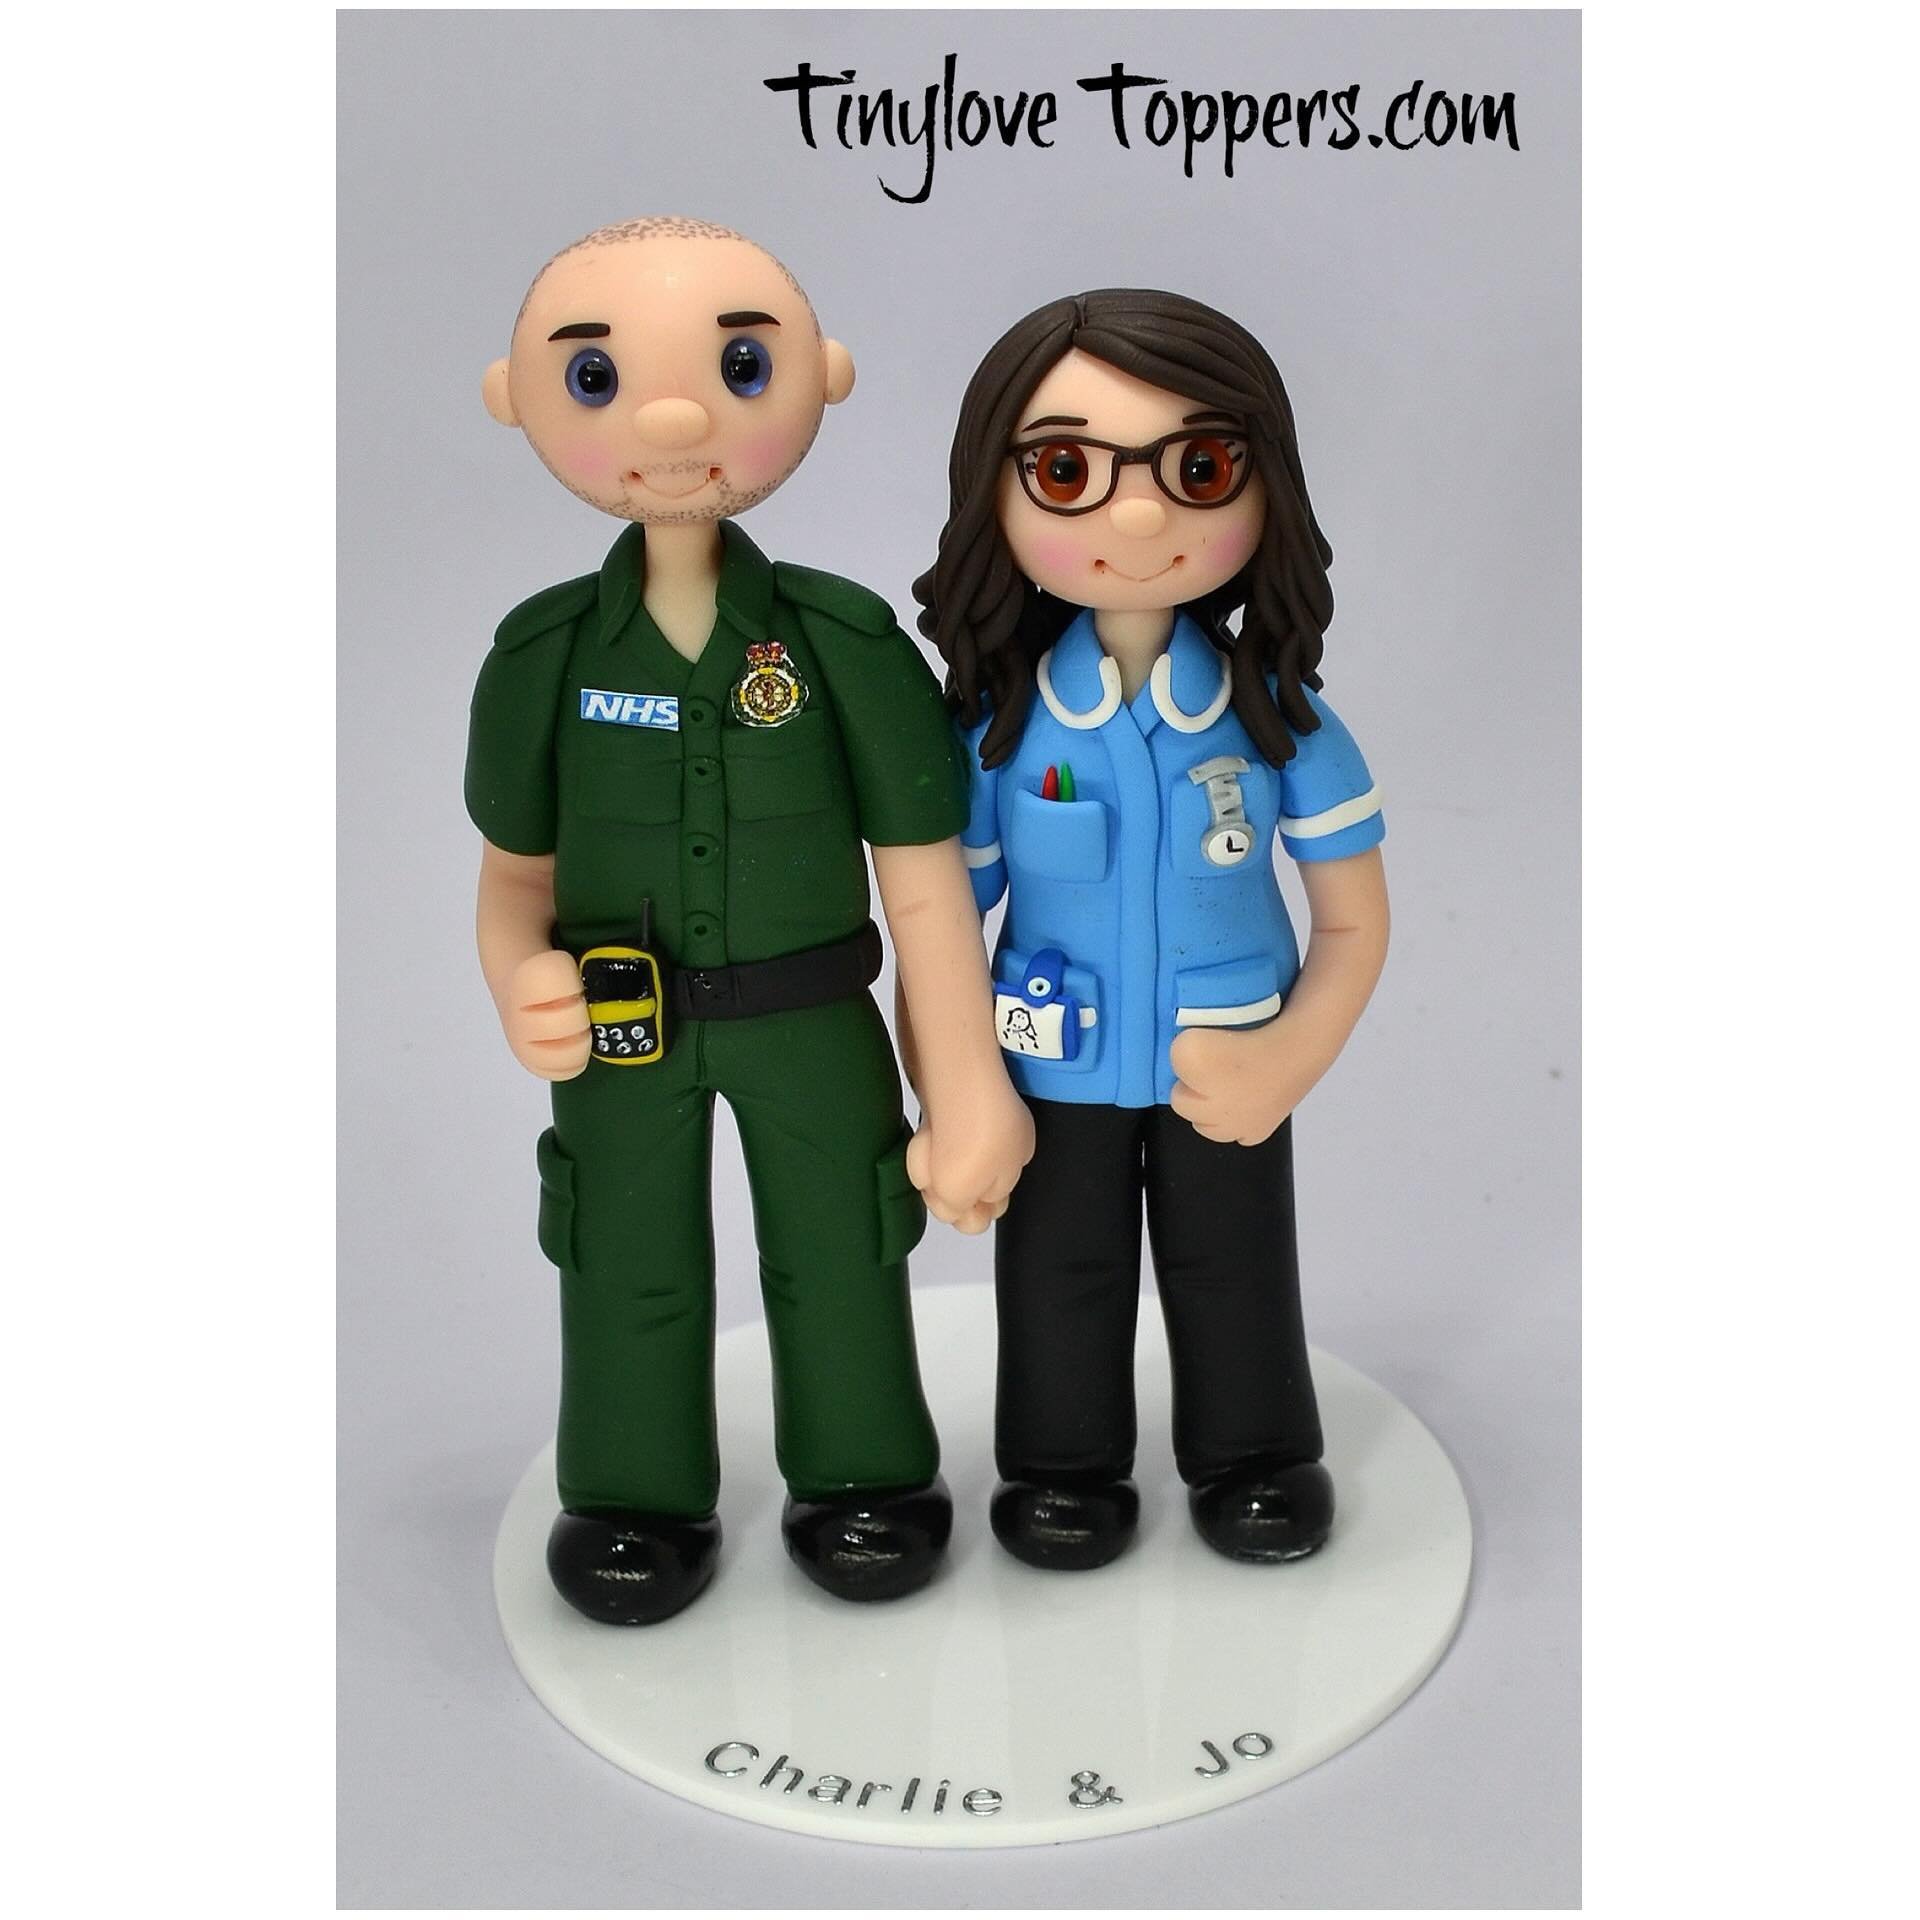 Personalised non edible wedding cake toppers.
made to look like you, lifelong keepsakes.
Message me if you would like a quote for yours. 🙂
Follow me on Instagram https://www.instagram.com/tinylove_cake_toppers/
#weddingcaketoppers #brideandgroom #br